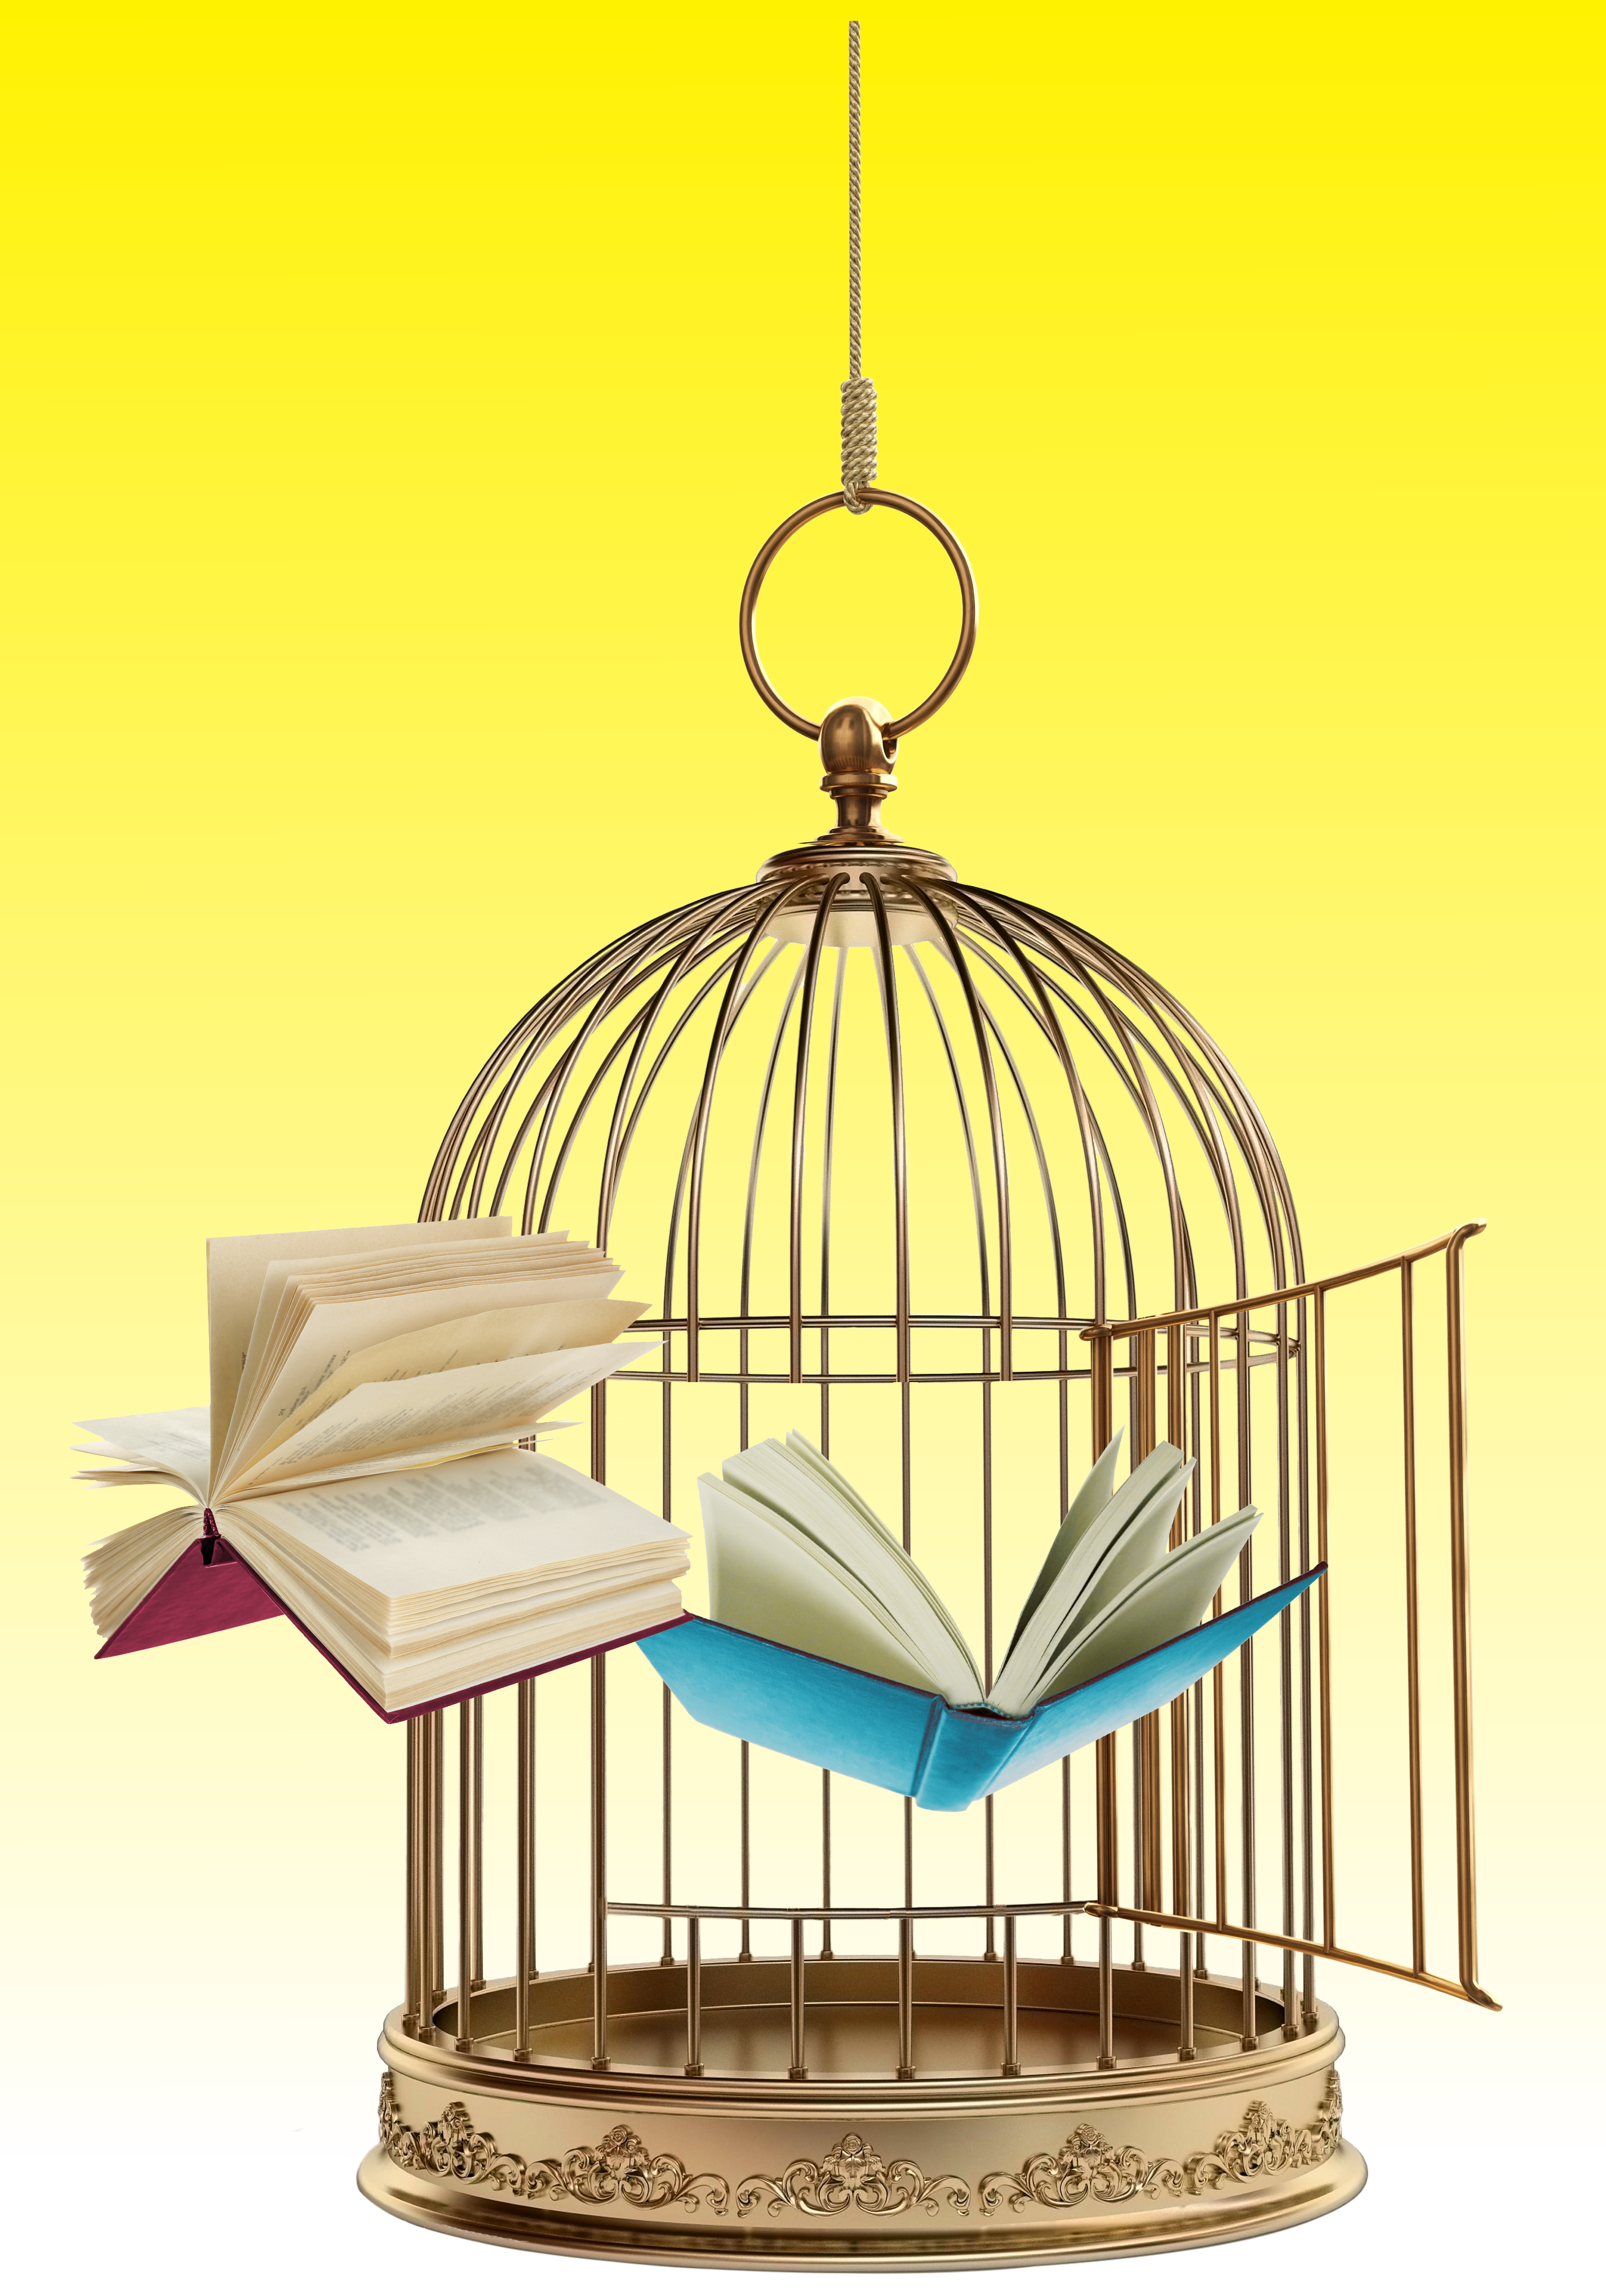 An open birdcage with books flying out of it in front of a soft yellow background.